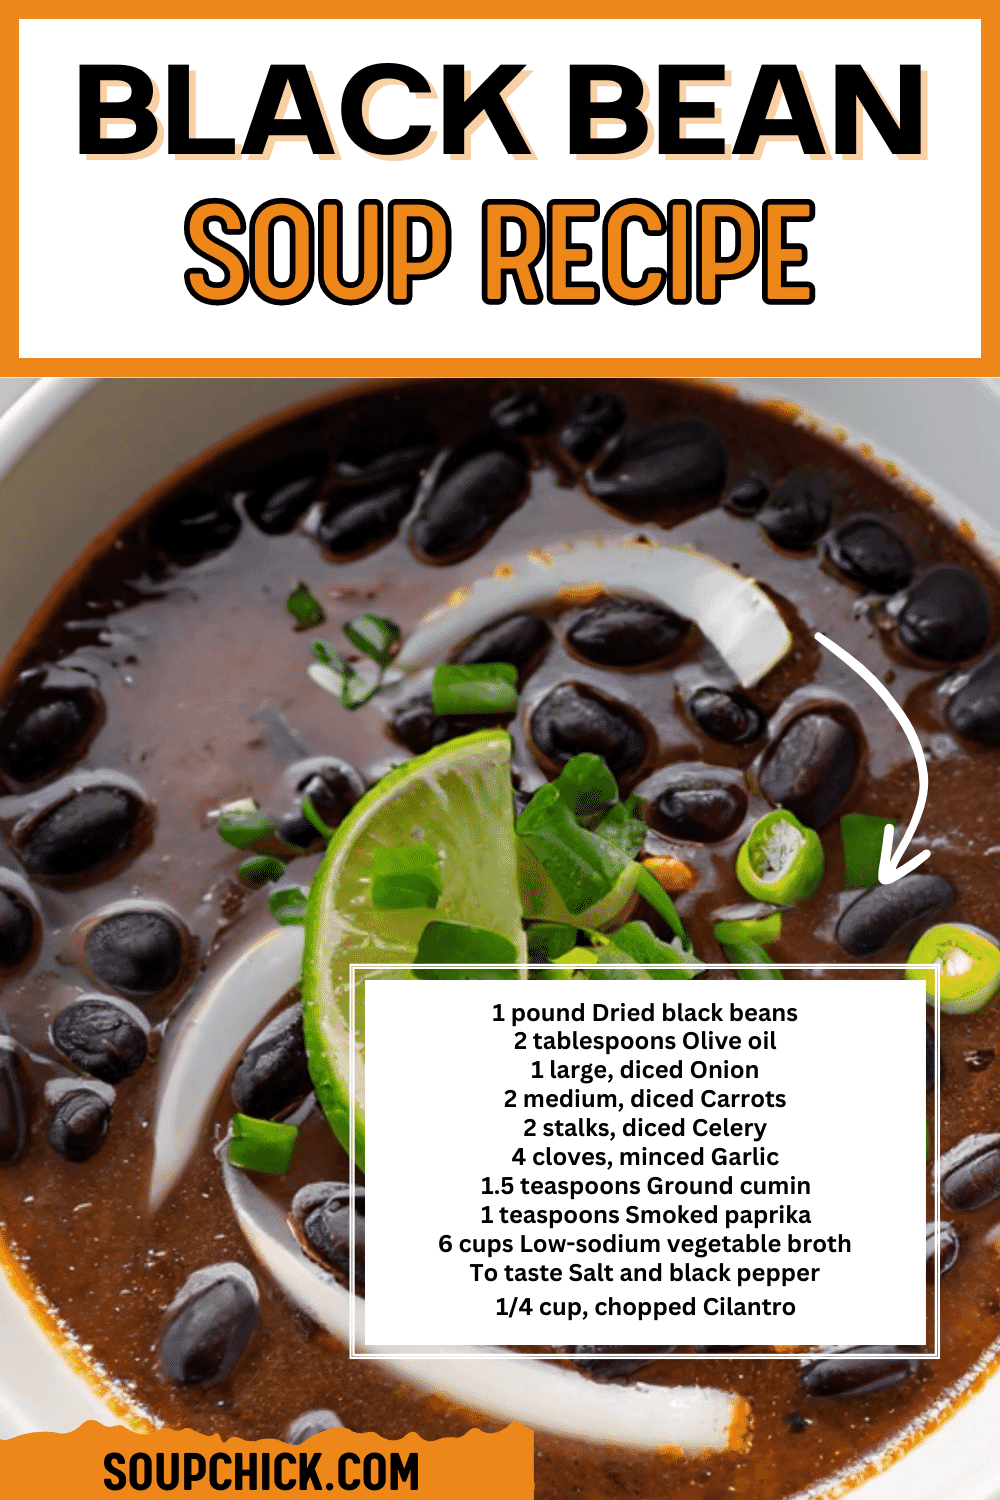 Homemade Black Bean Soup Recipe – From Pot To Bowl In 35 Minutes ...